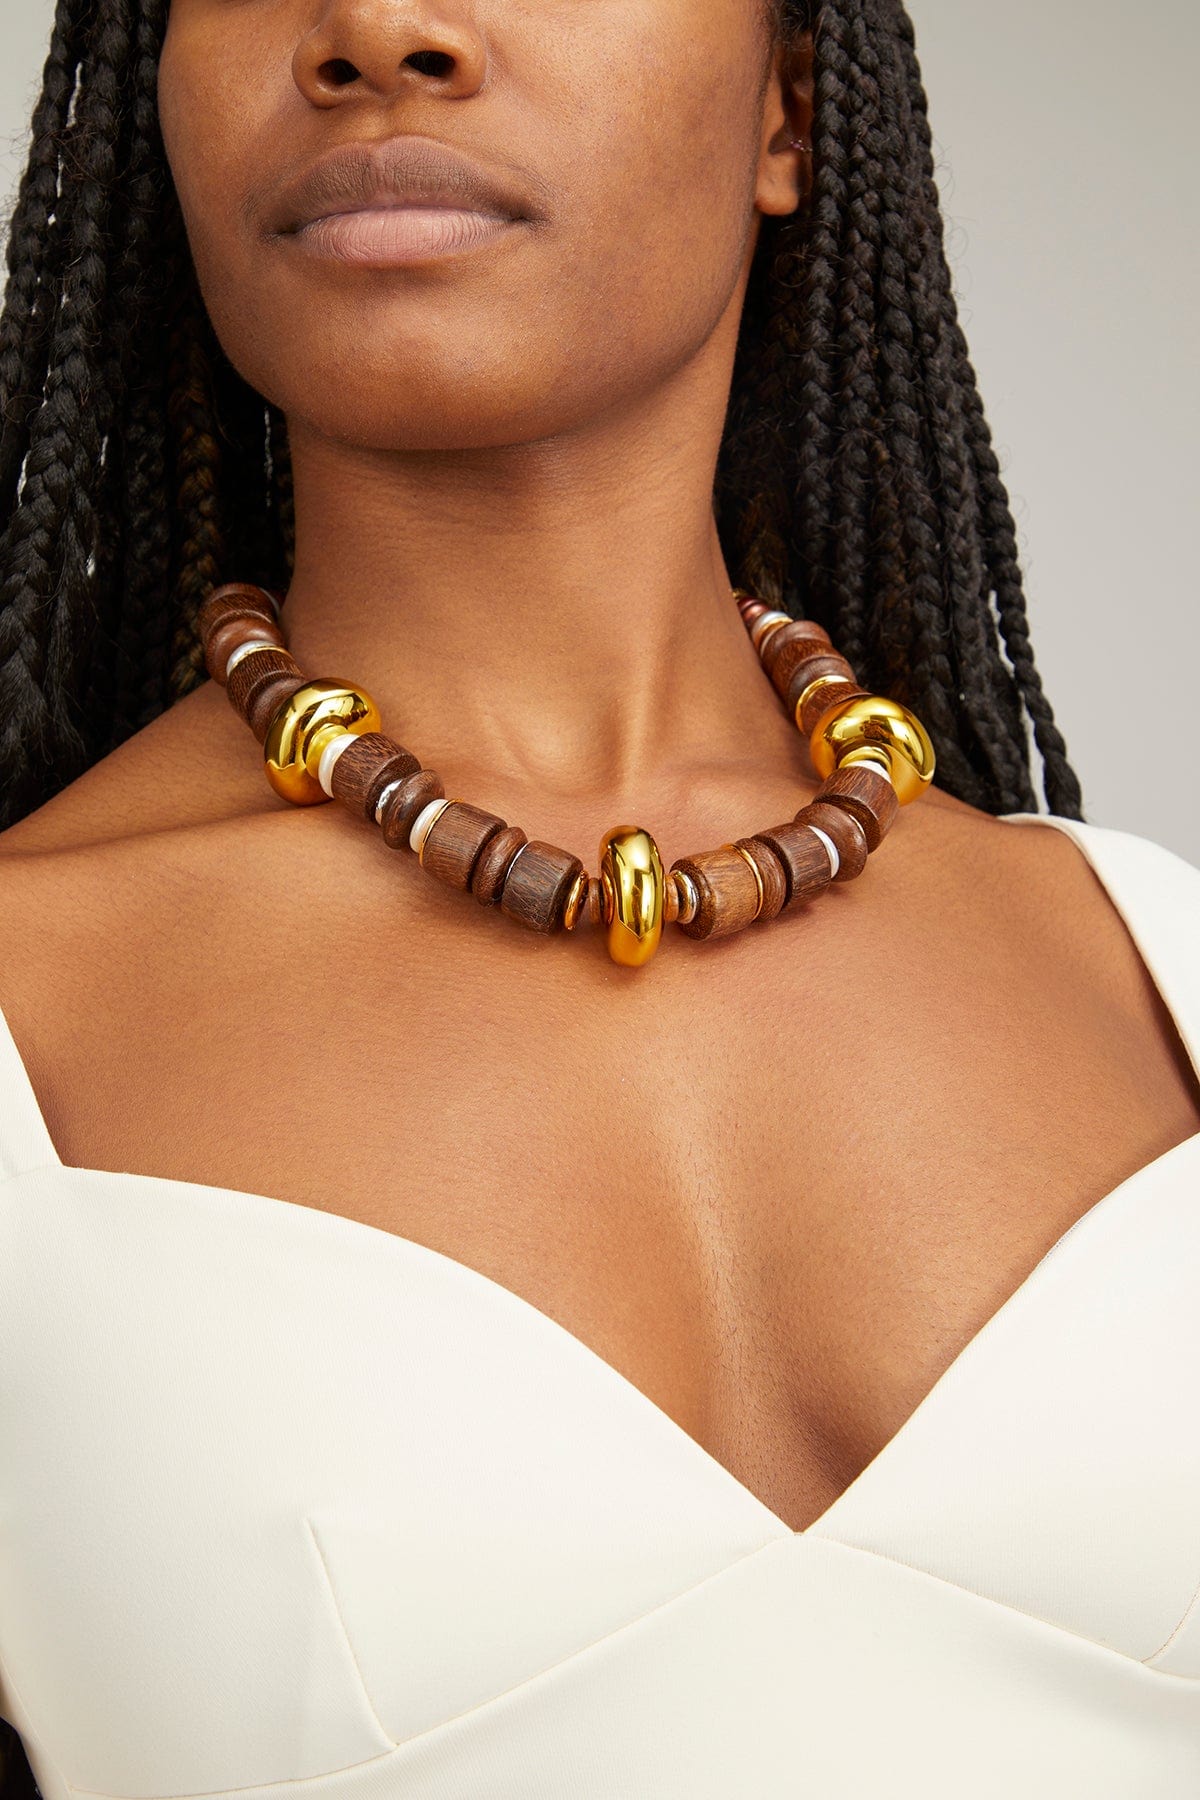 Lizzie Fortunato Necklaces Robles Necklace in Brown Lizzie Fortunato Robles Necklace in Brown